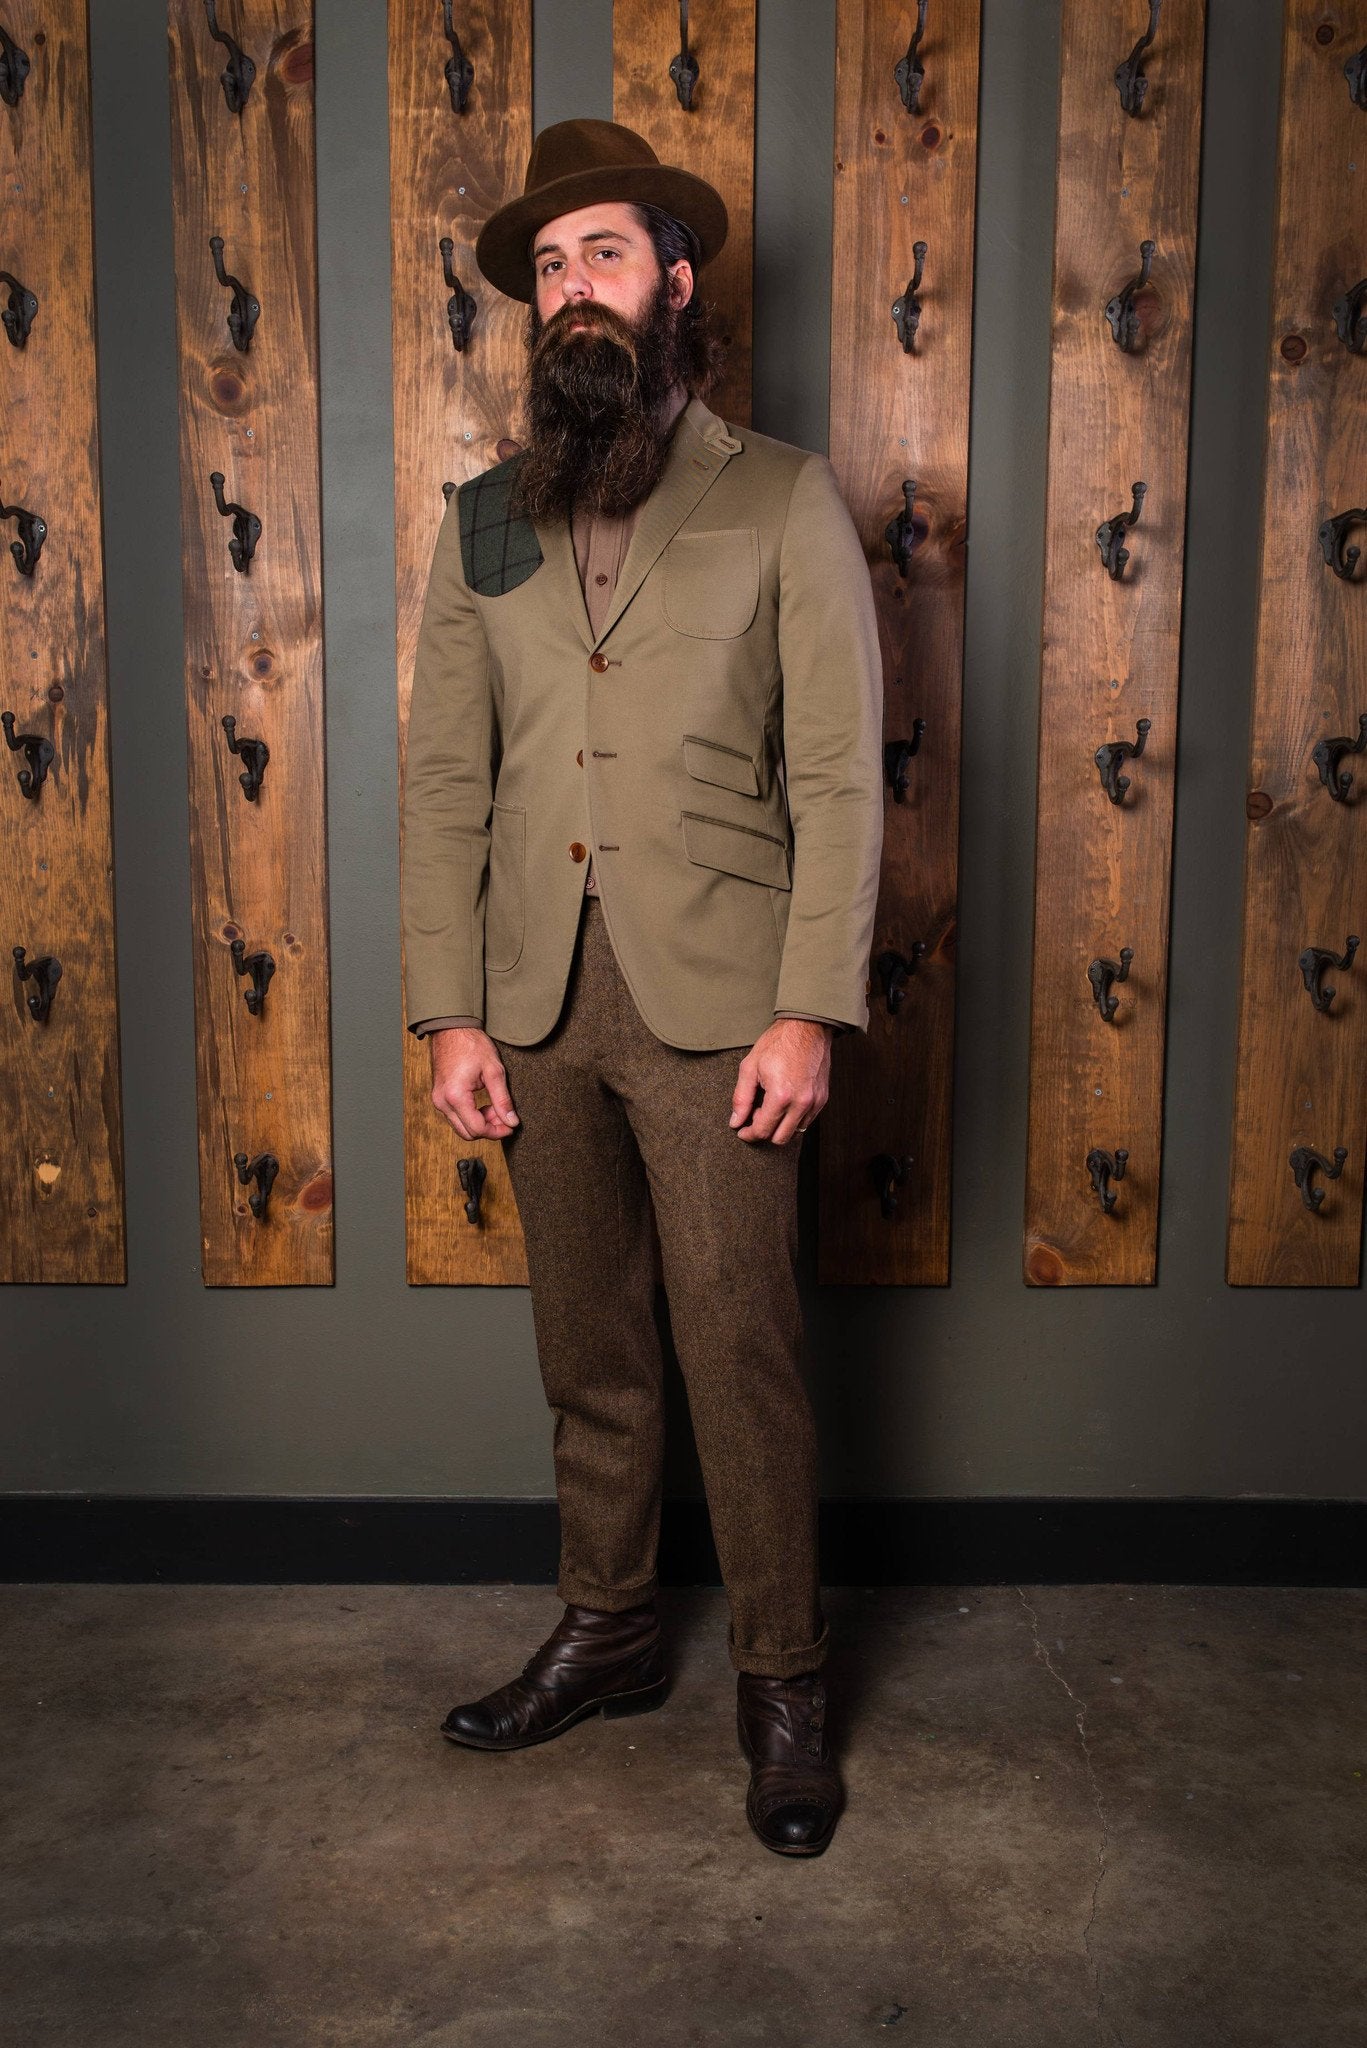 Shooting jacket-Bykowski Tailor & Garb Wool Cotton tailored fit slim fit prohibition Made in USA Handcrafted Edwardian Casual 1930's 1920's 1910's hunting jacket 